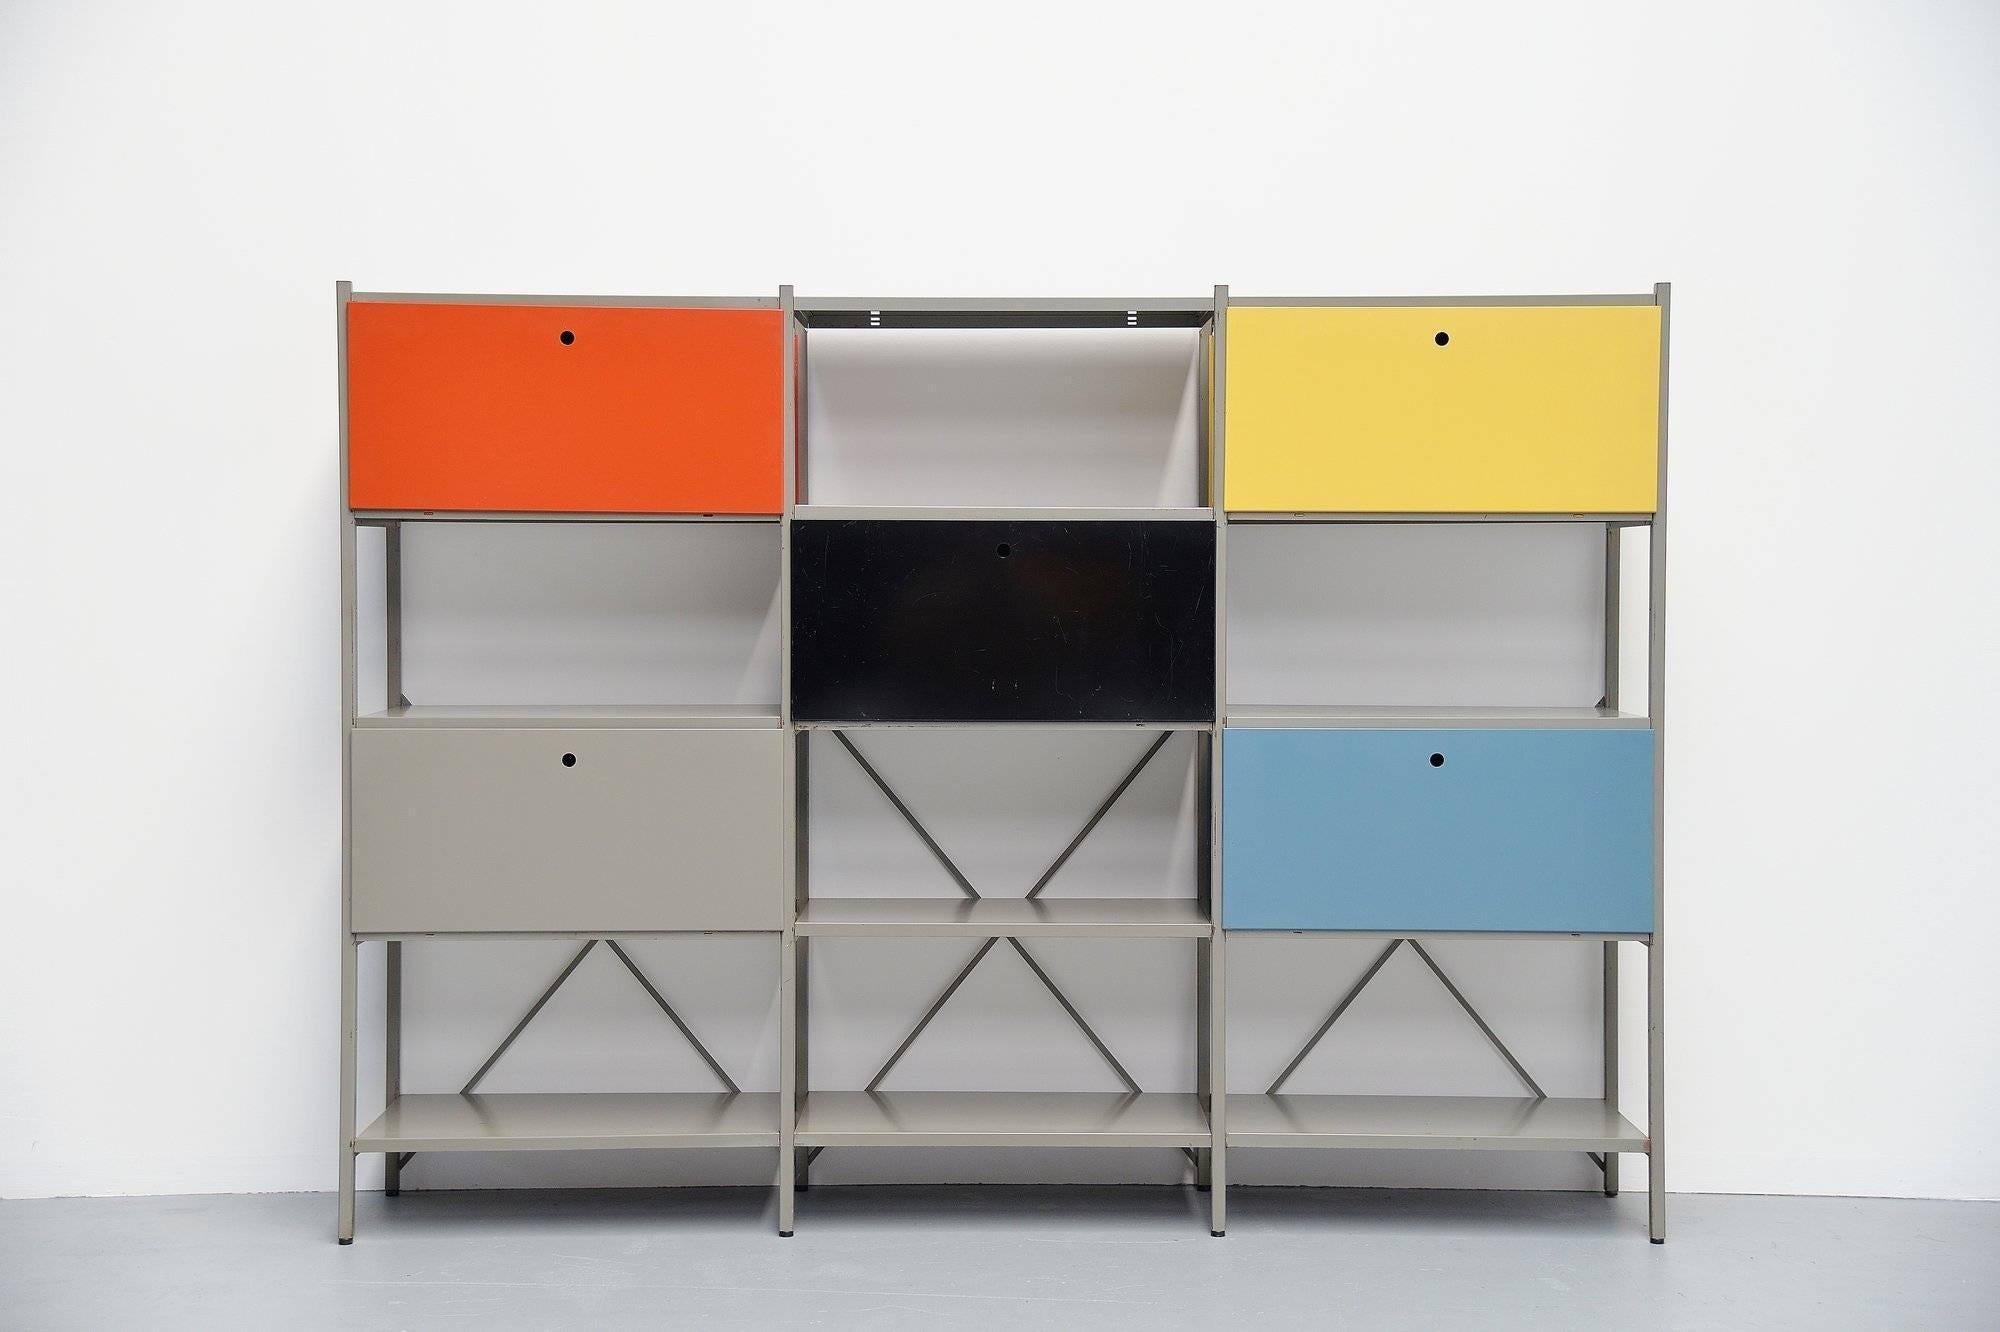 Impressive industrial bookcase model 663, wall unit or room divider designed by Wim Rietveld (1924-1985) son of Gerrit Thomas Rietveld, for Gispen Culemborg in 1954. A very nice modular wall unit that can be built by your own taste and needs. This